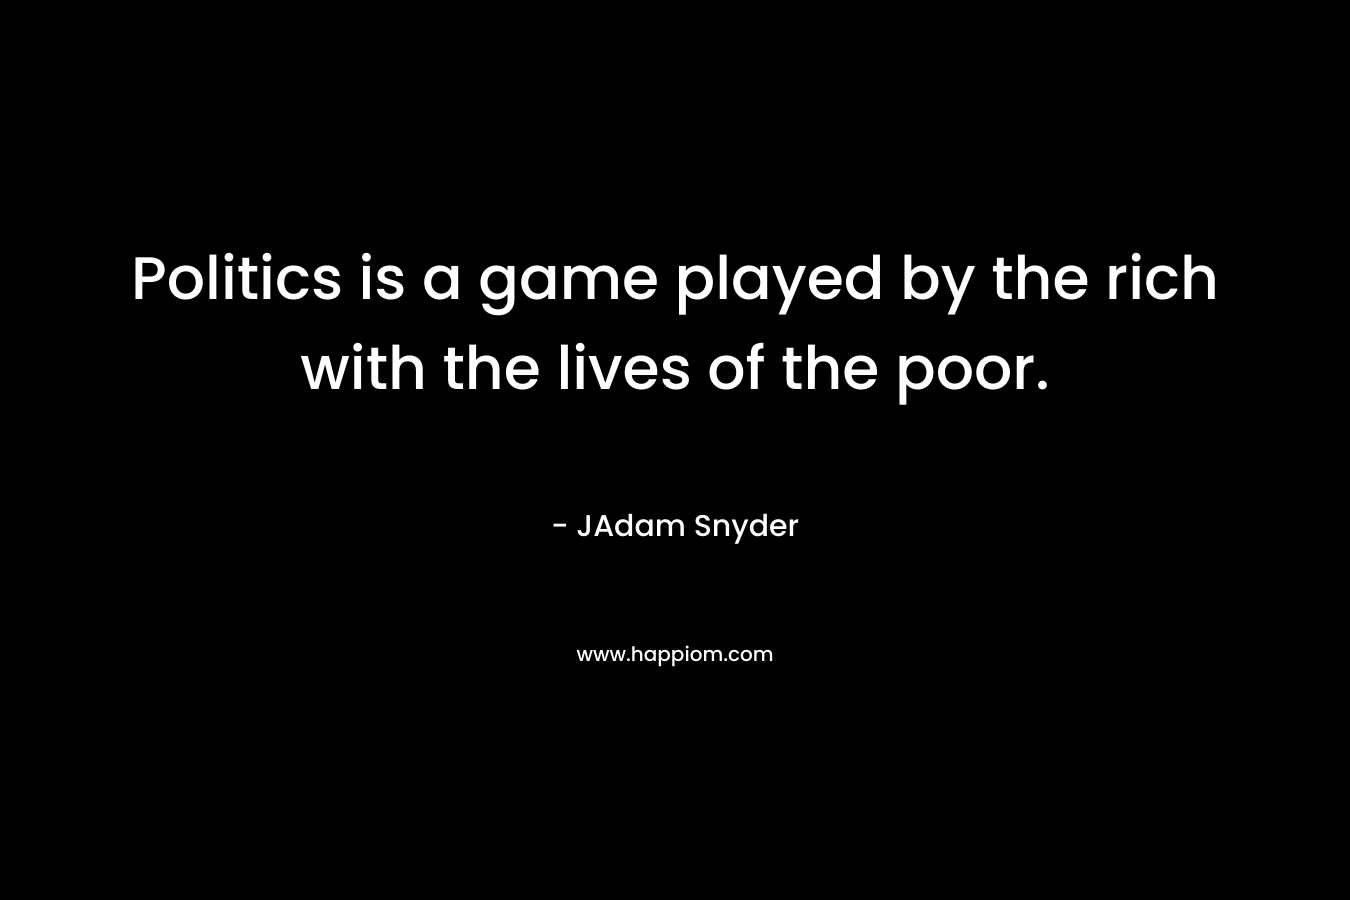 Politics is a game played by the rich with the lives of the poor.